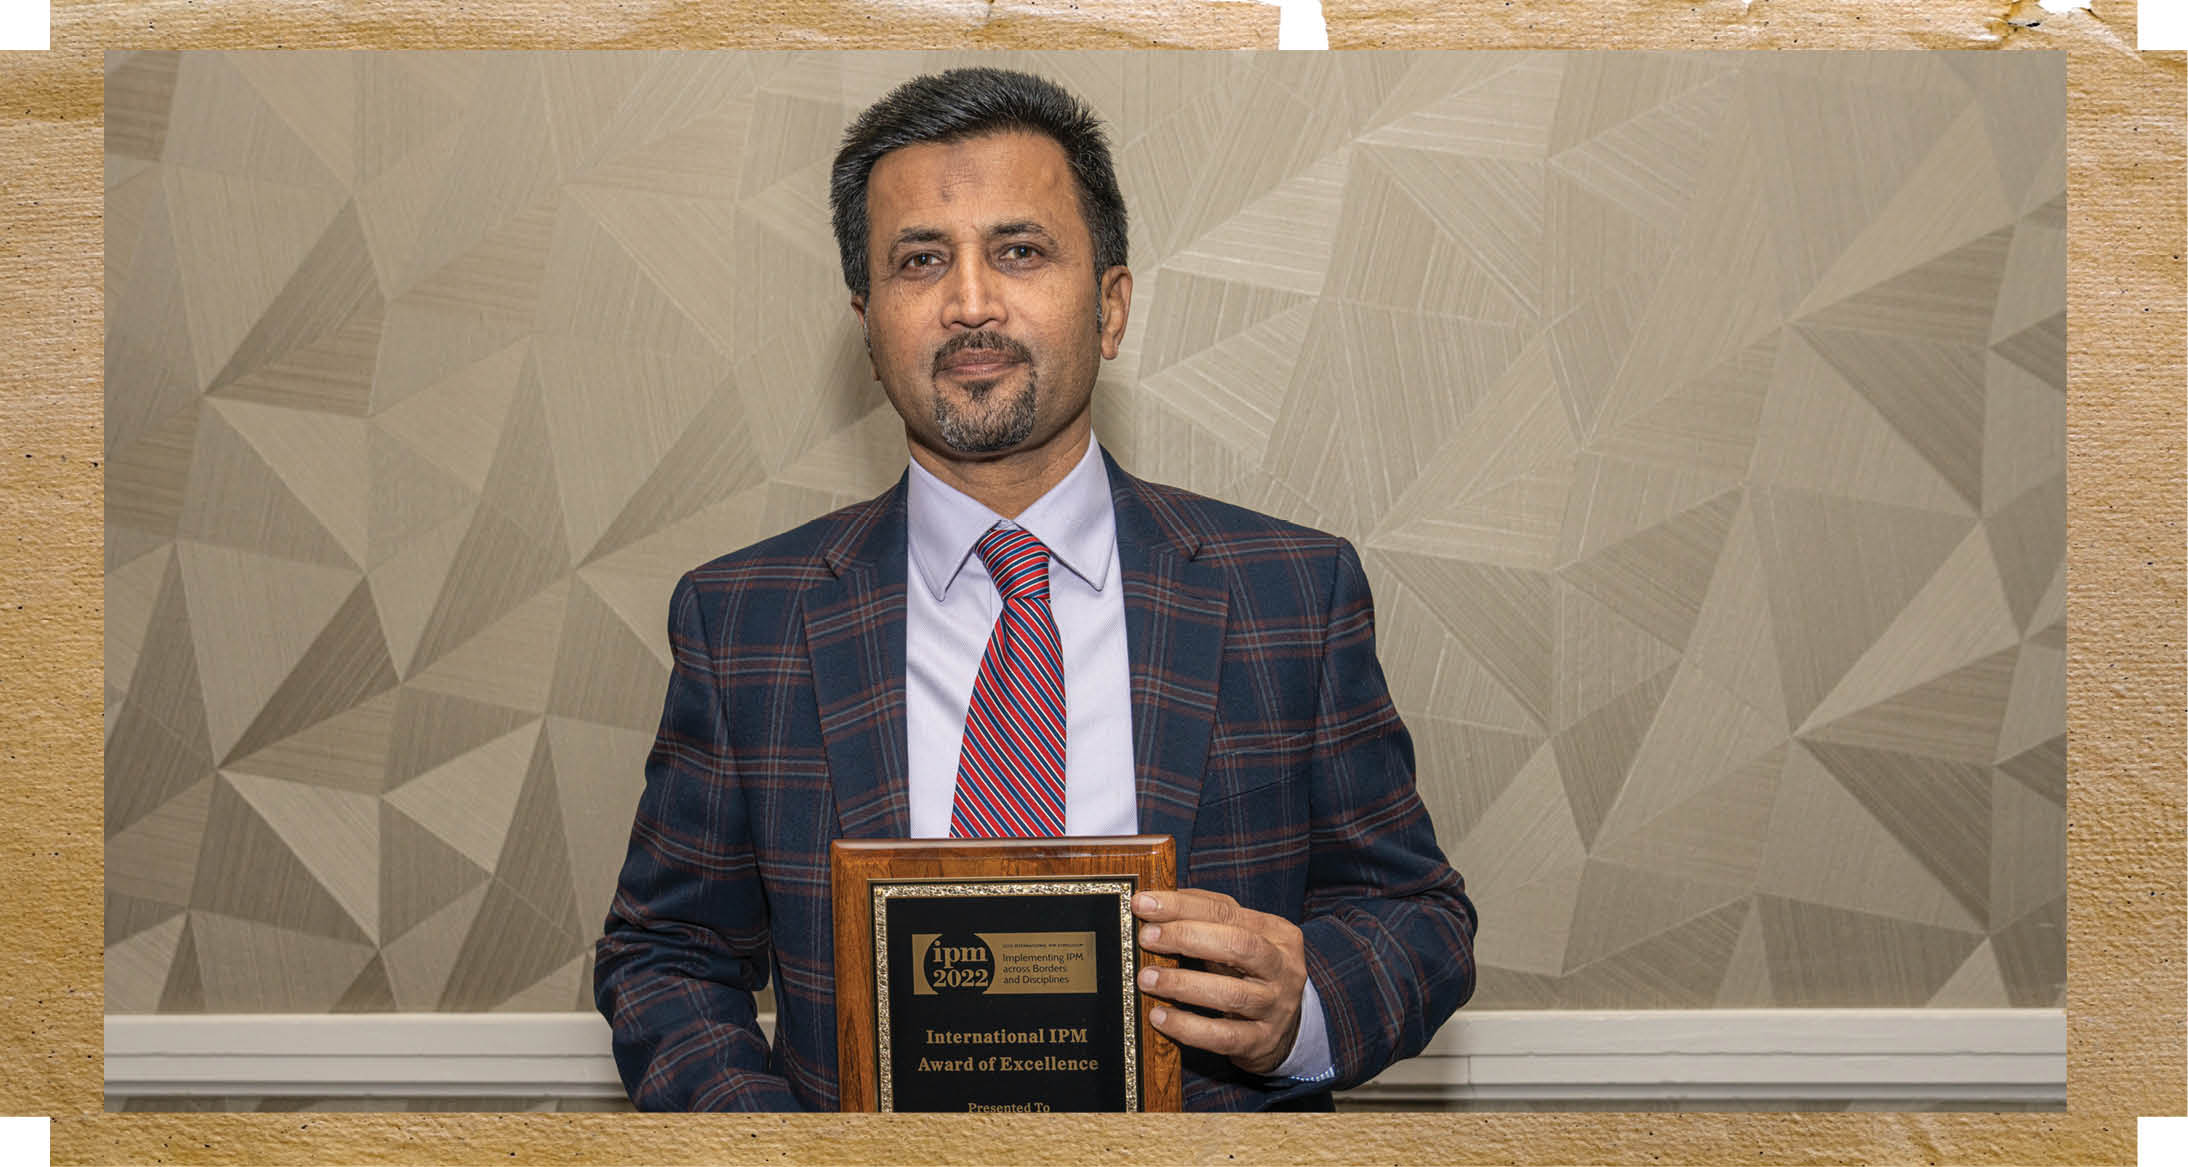 Dr. Qureshi holding his plaque award